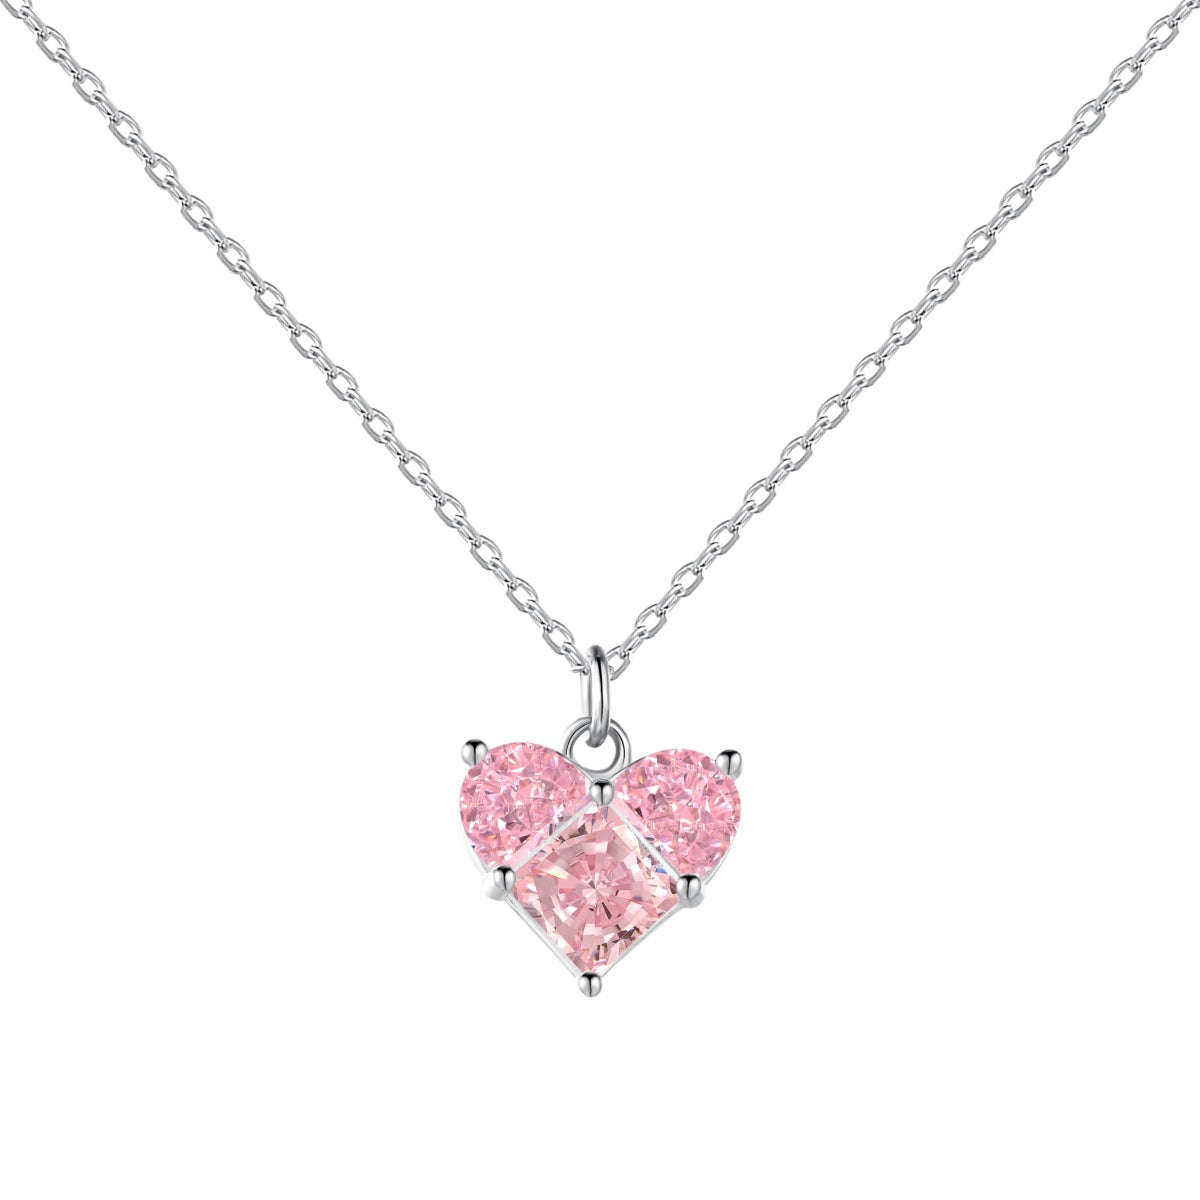 ICY HEART NECKLACE